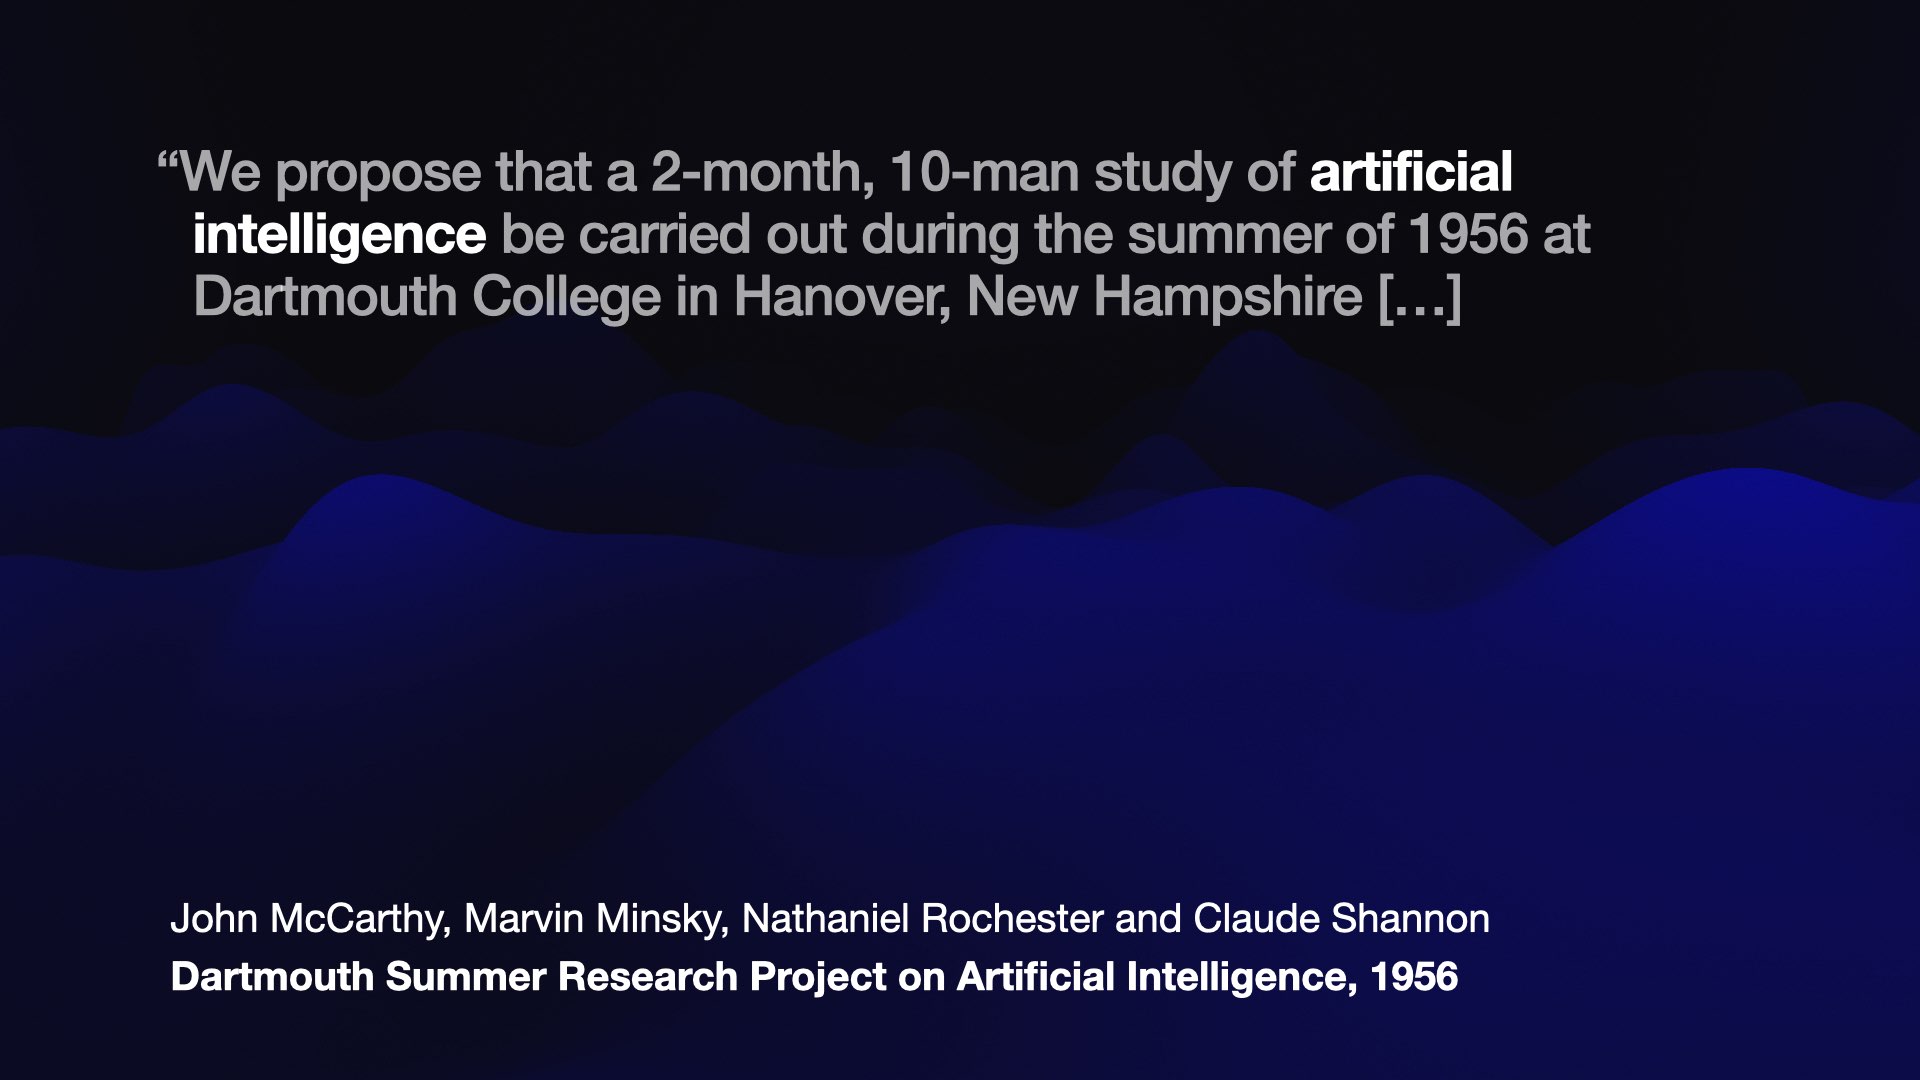 “We propose that a 2-month, 10-man study of artificial intelligence be carried out during the summer of 1956 at Dartmouth College in Hanover, New Hampshire [...]  John McCarthy, Marvin Minsky, Nathaniel Rochester and Claude Shannon Dartmouth Summer Research Project on Artificial Intelligence, 1956 